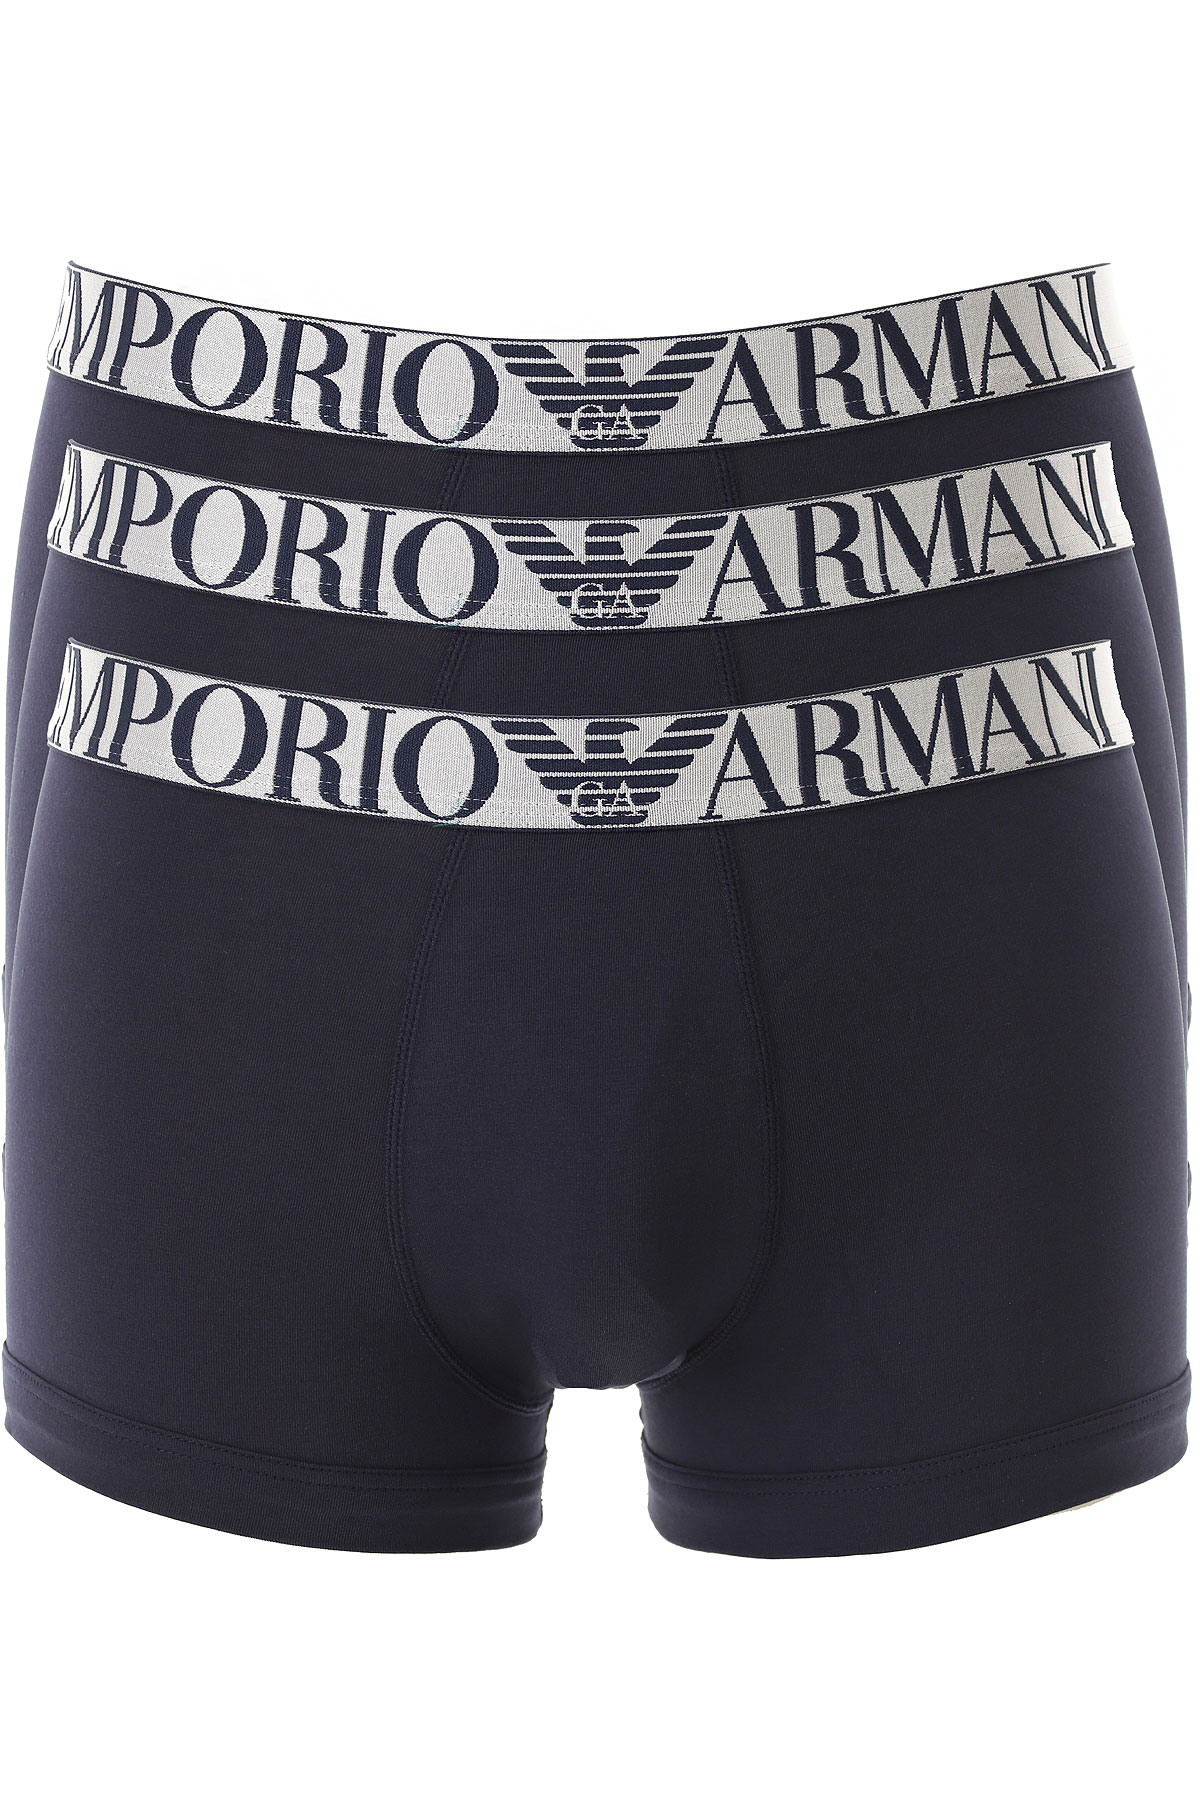 Emporio Armani Men's Classic Pattern Mix 2-Pack Brief, Cachemire/Eclipse,  Small at  Men's Clothing store